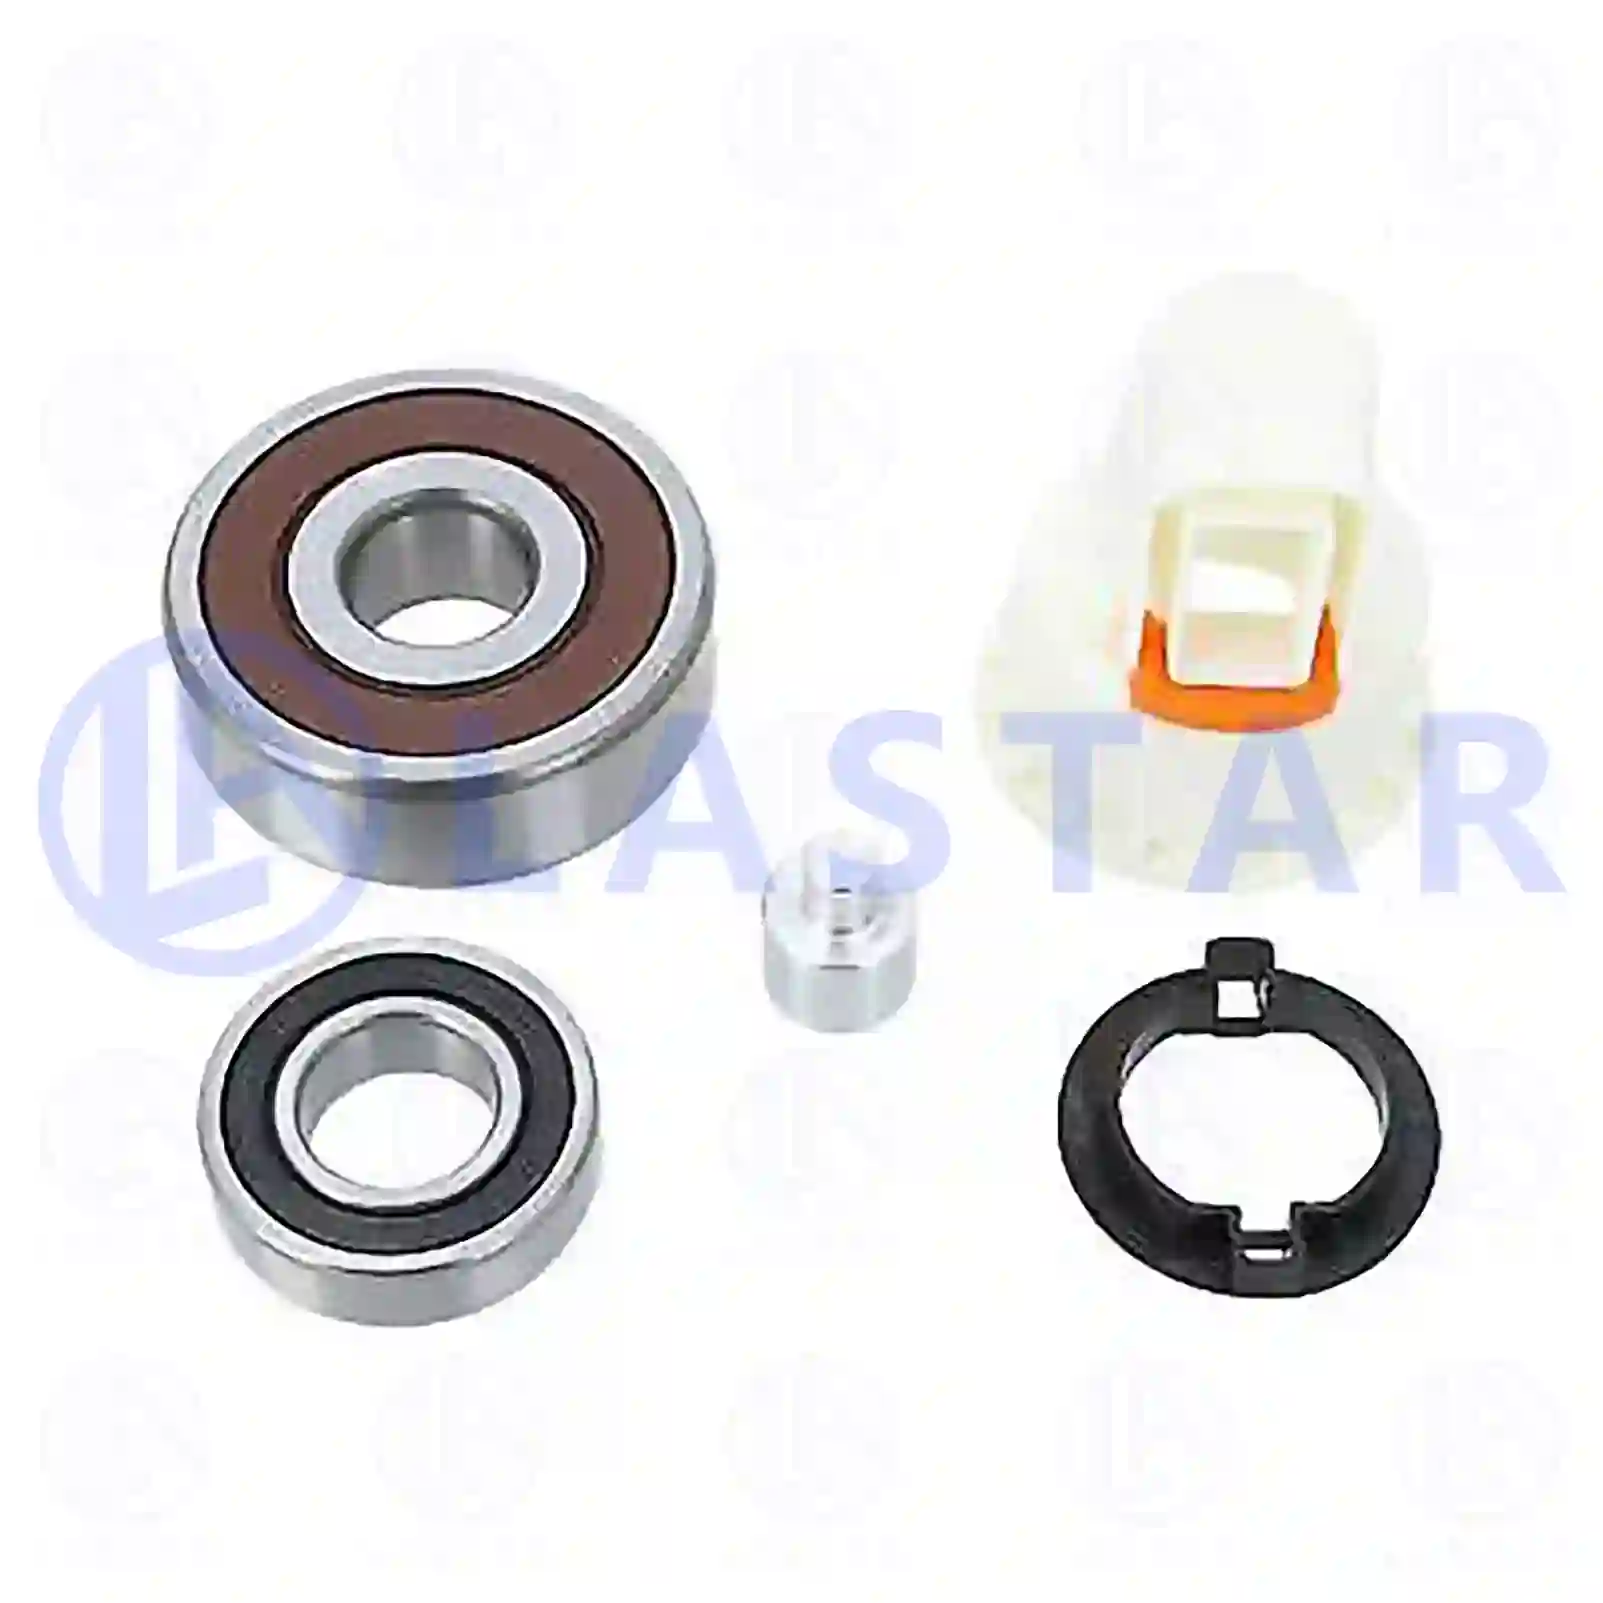  Ball bearing kit || Lastar Spare Part | Truck Spare Parts, Auotomotive Spare Parts